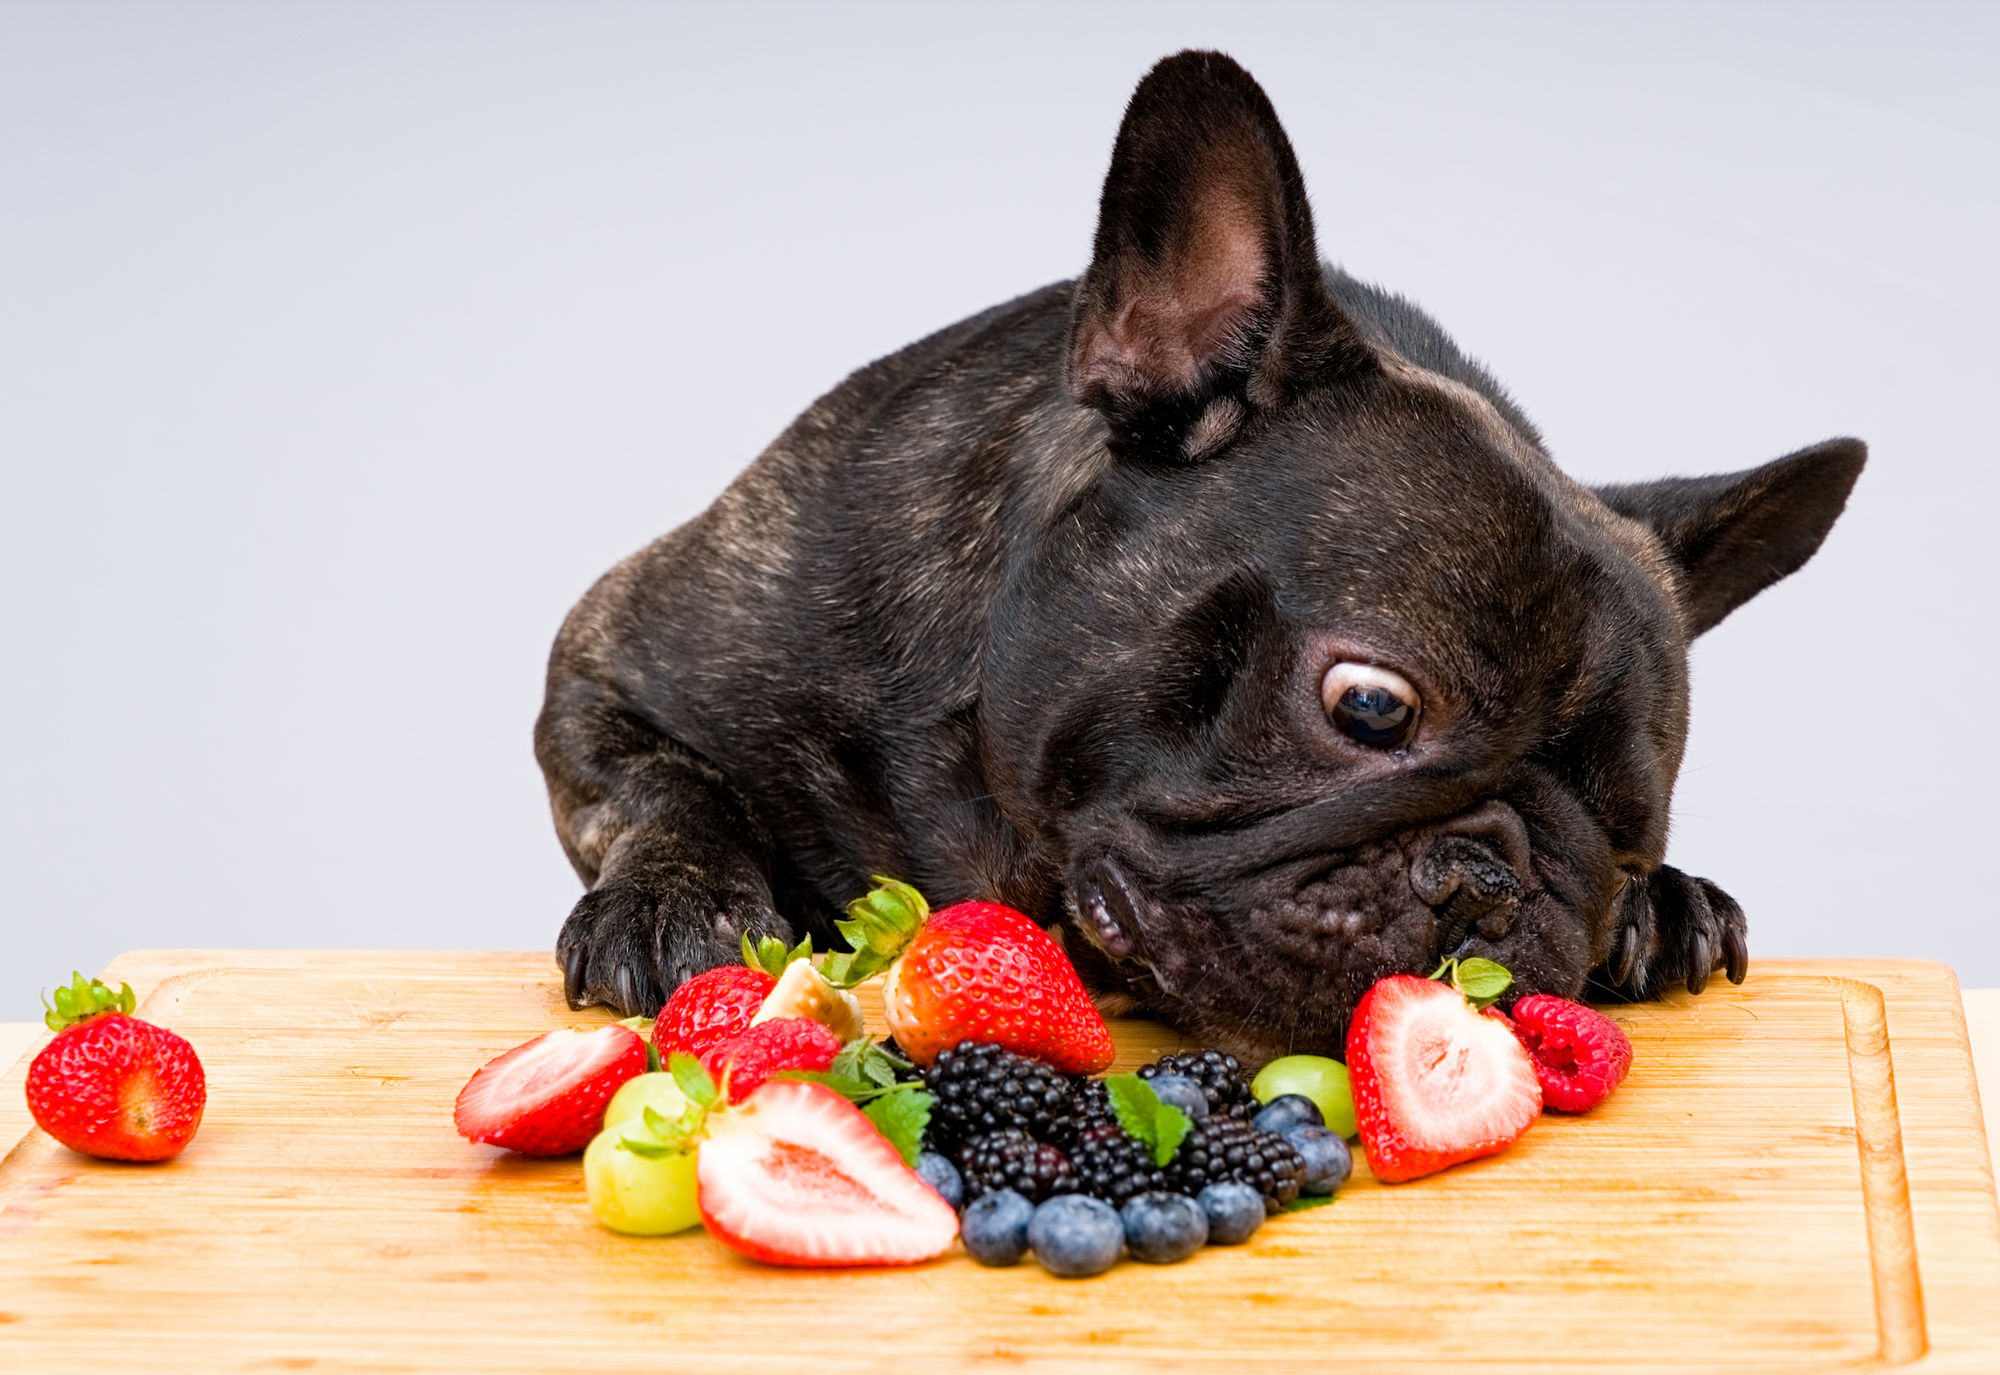 Should You Add Fresh Food to Your Dog’s Diet?